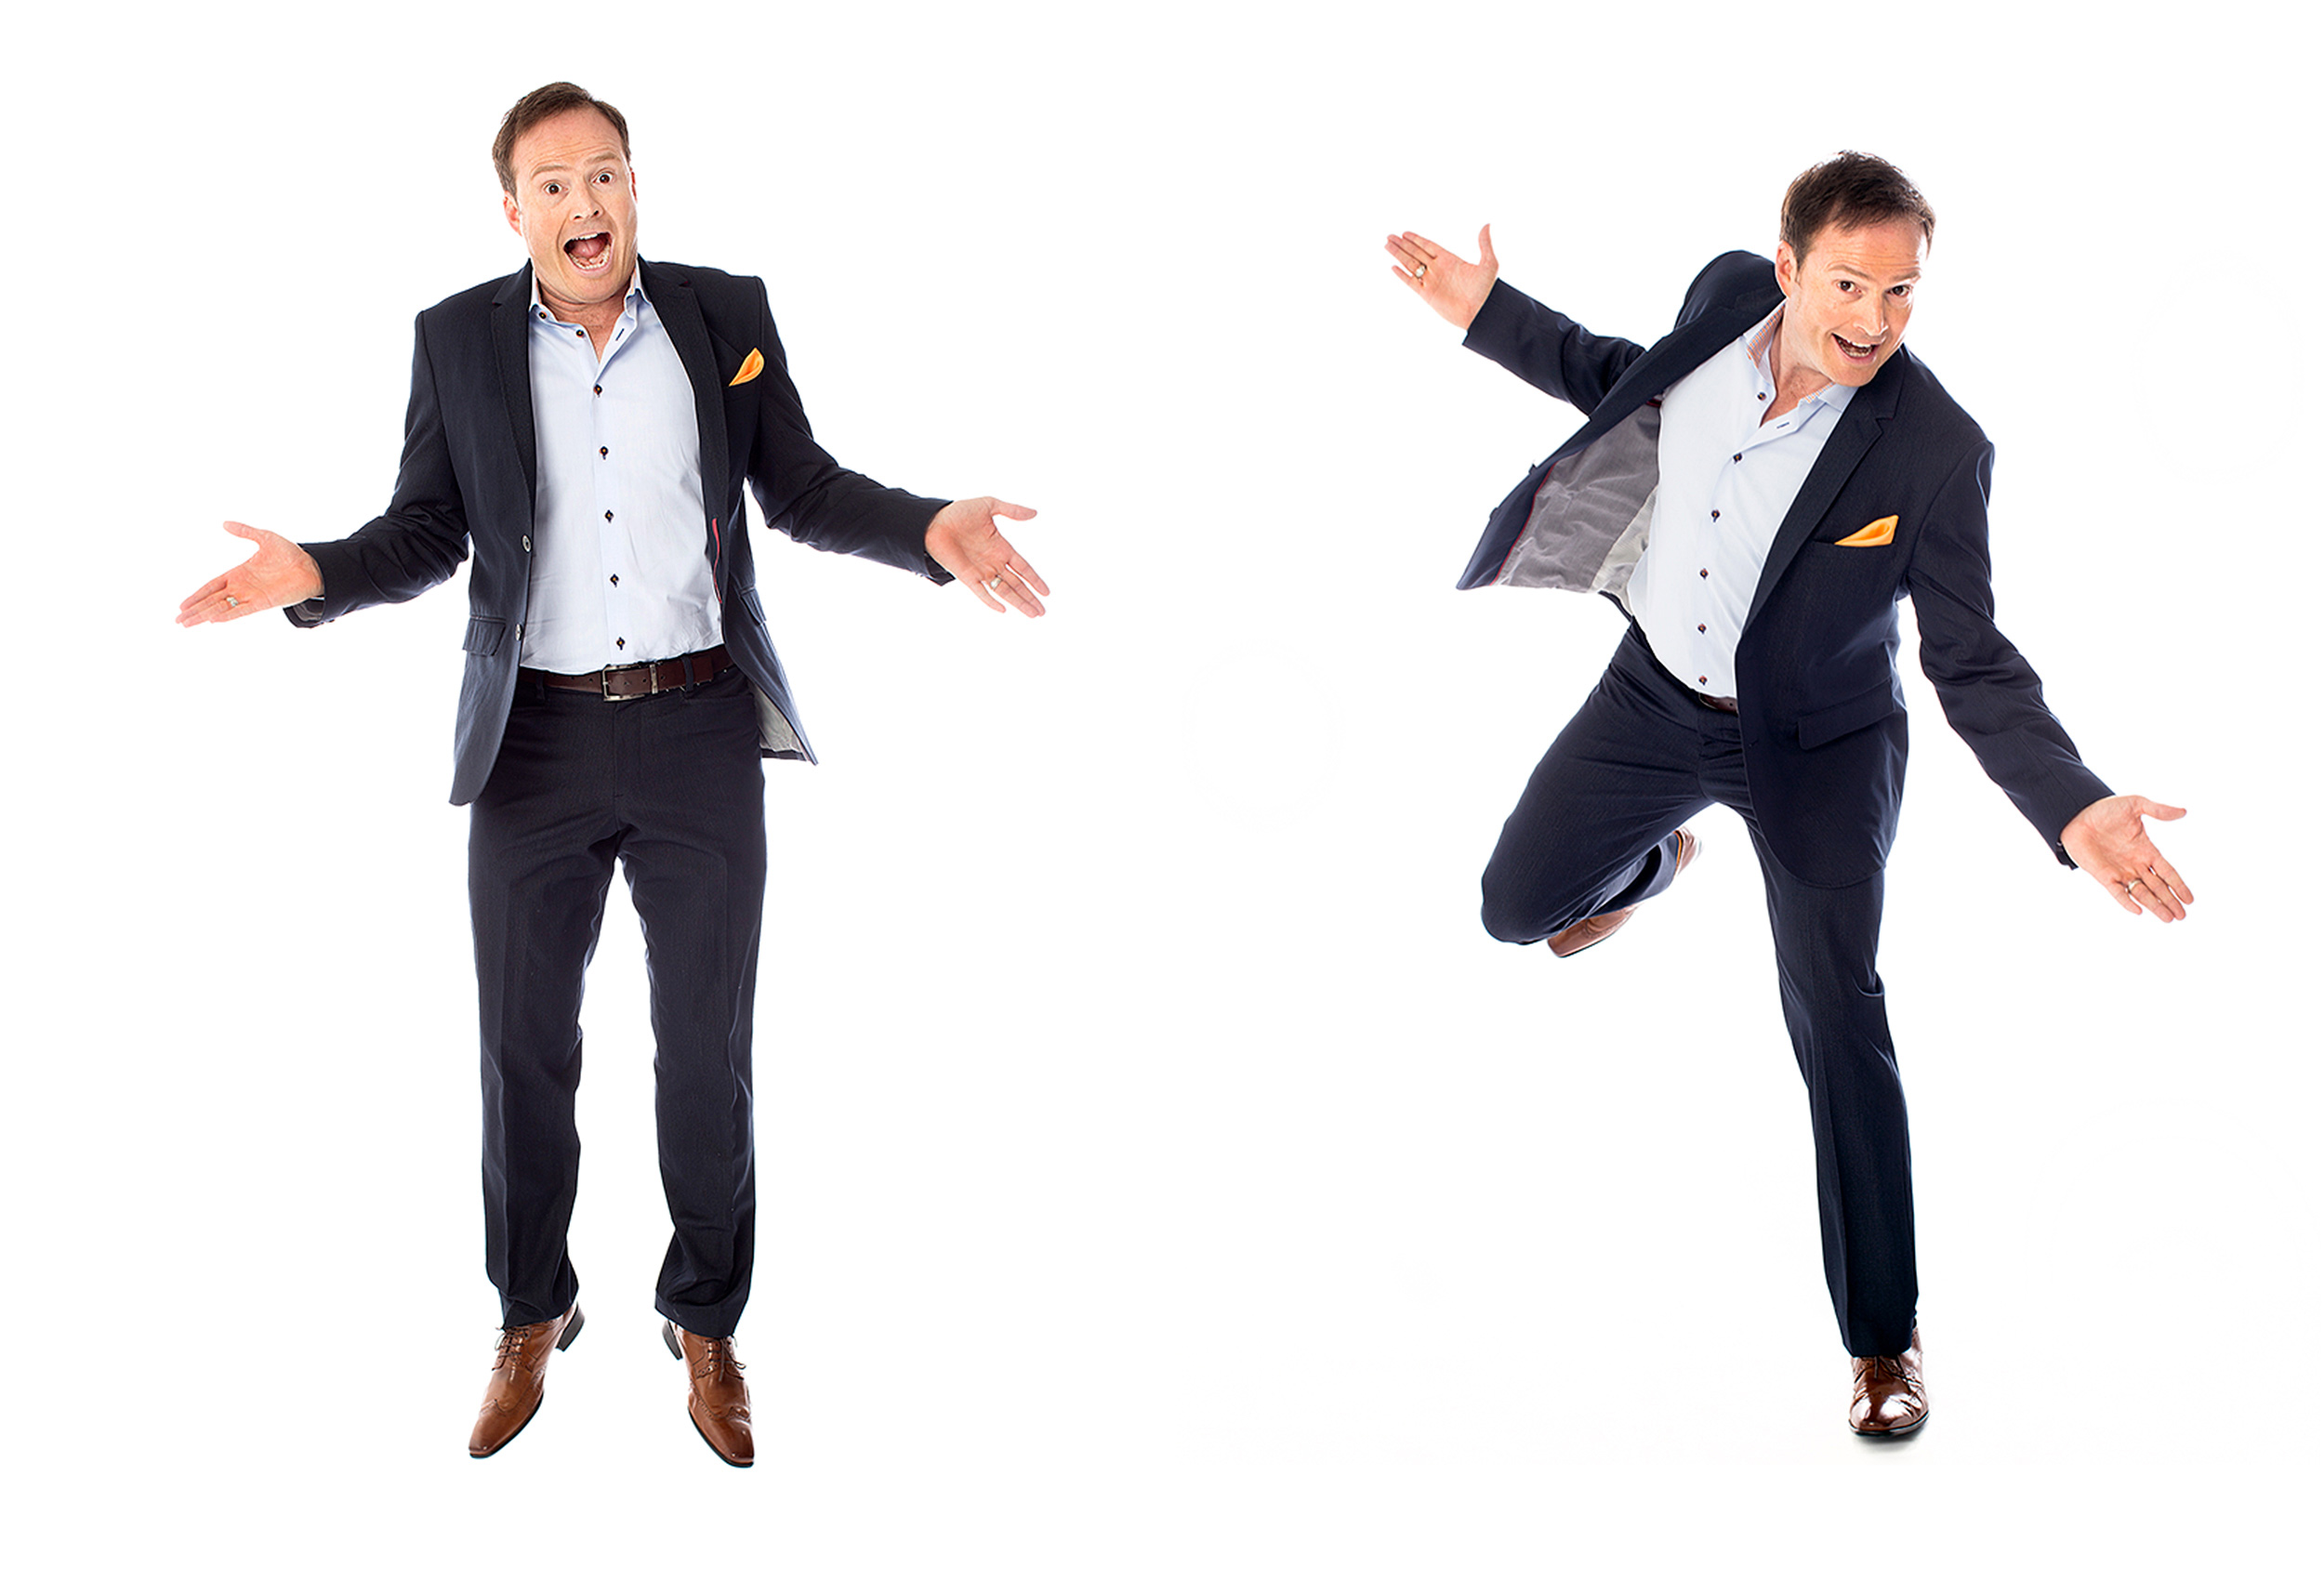 celebrity steve patterson does funny poses for his professional photos in a toronto studio